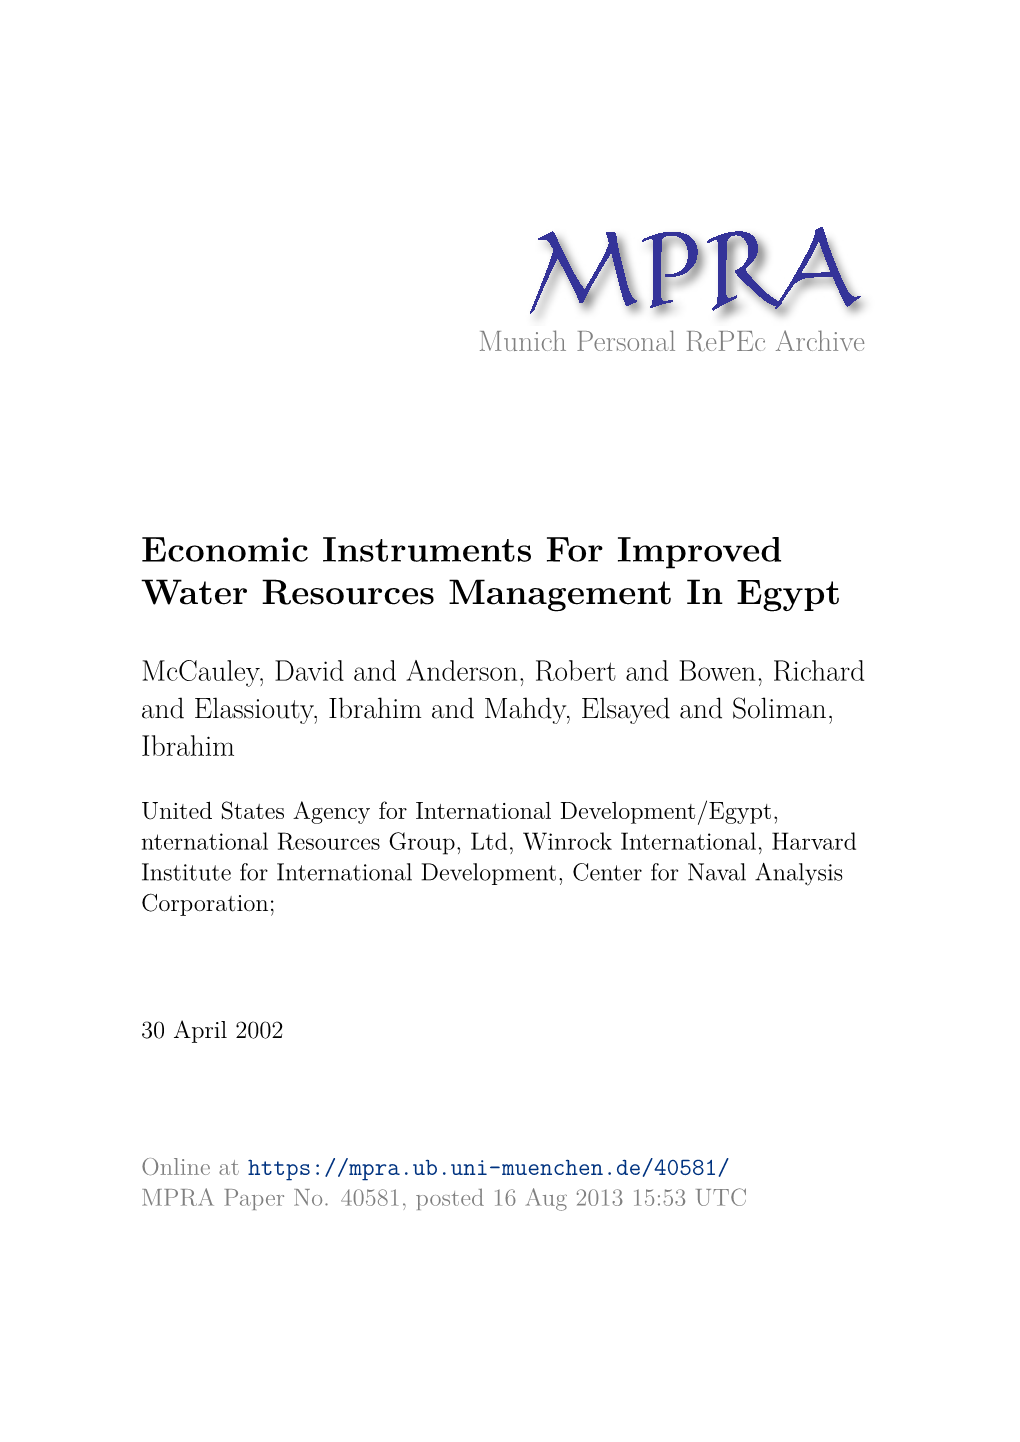 Economic Instruments for Improved Water Resources Management in Egypt